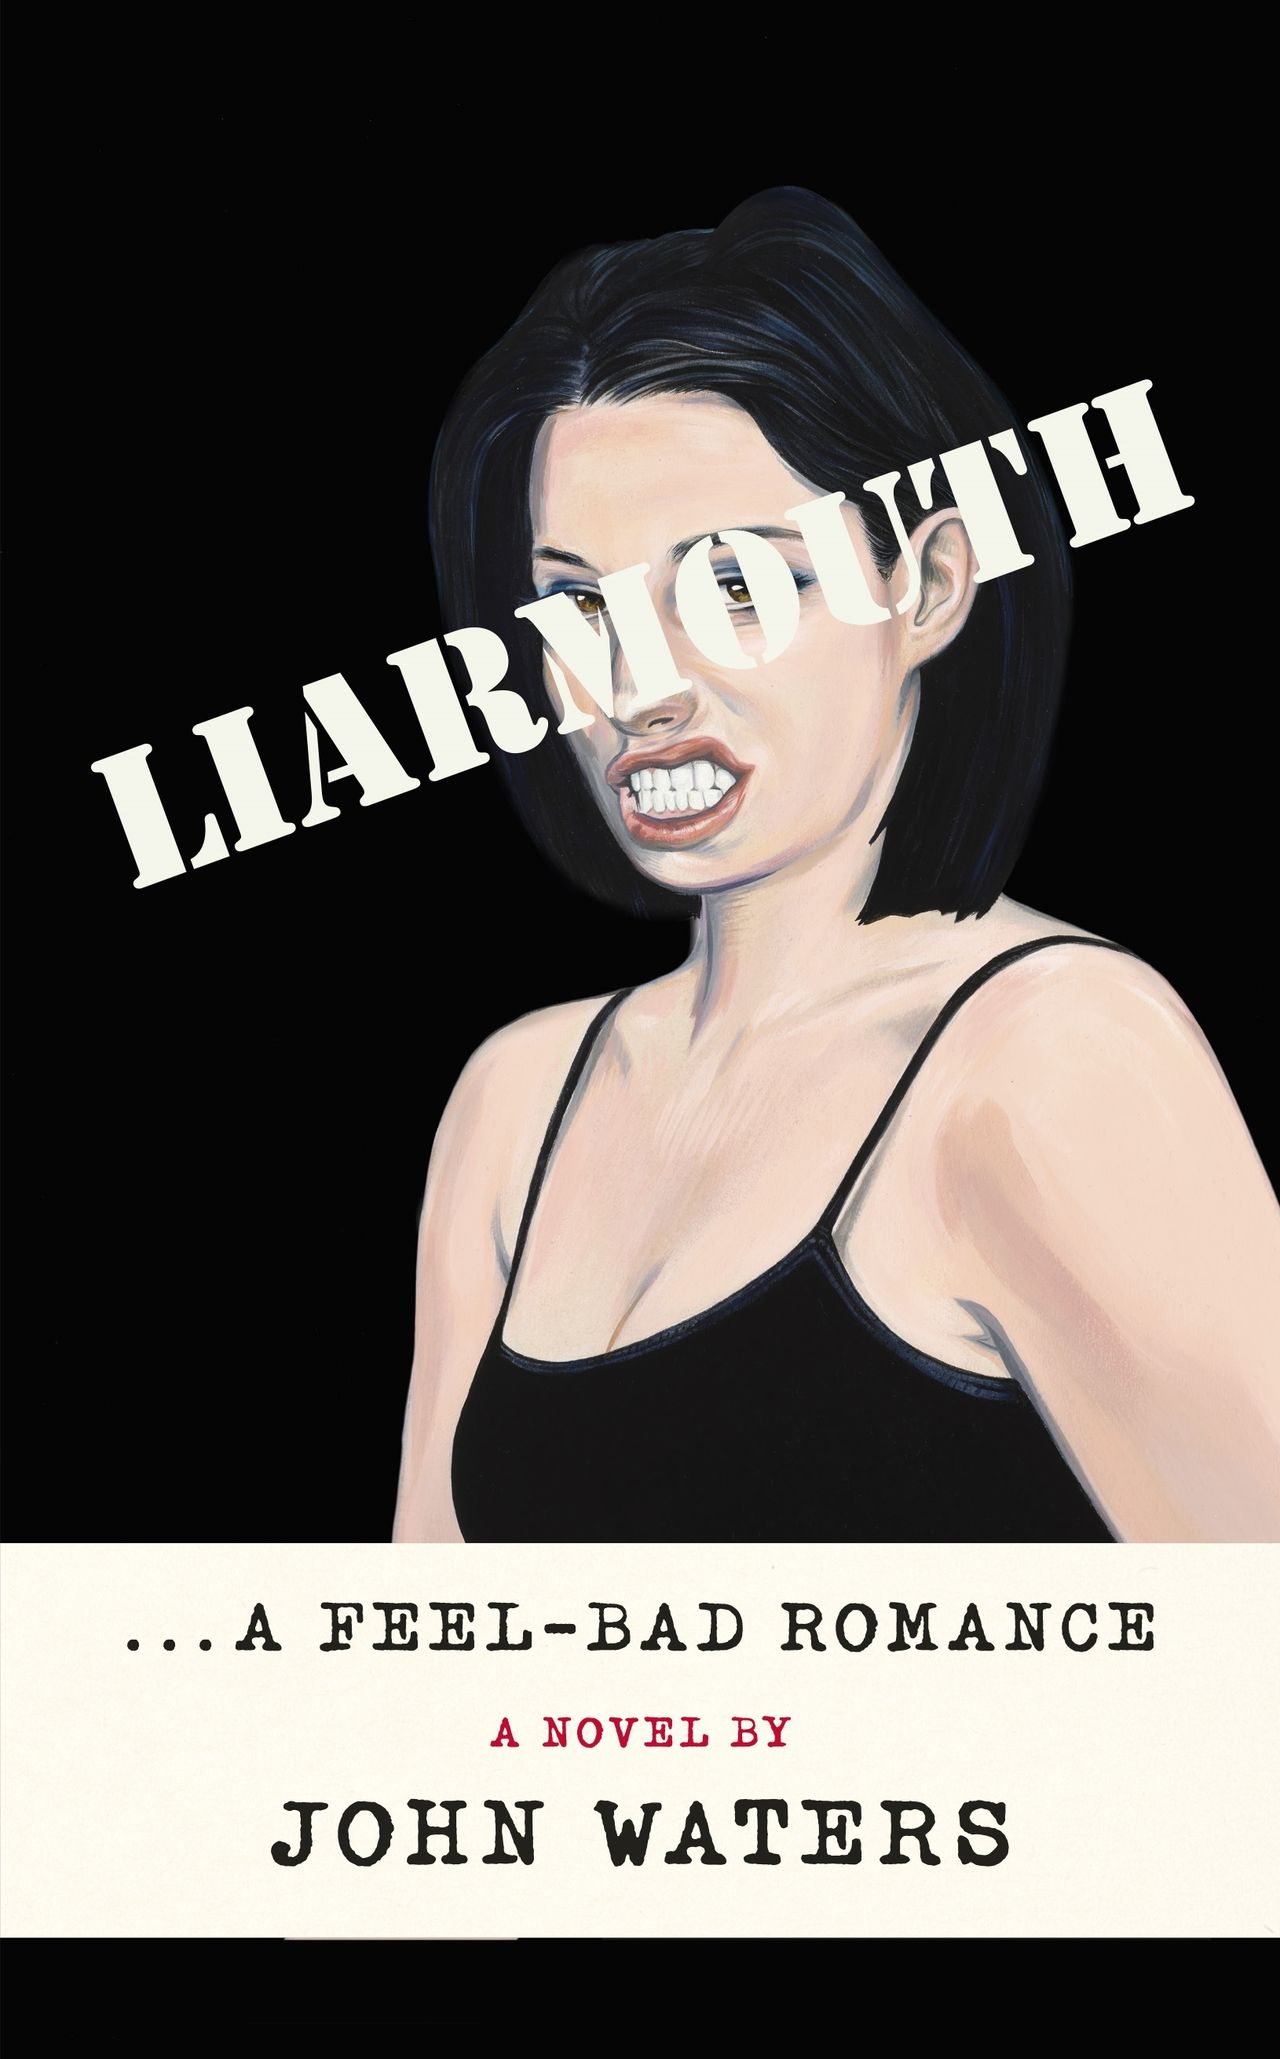 Liarmouth: A Feel Bad Romance by John Waters